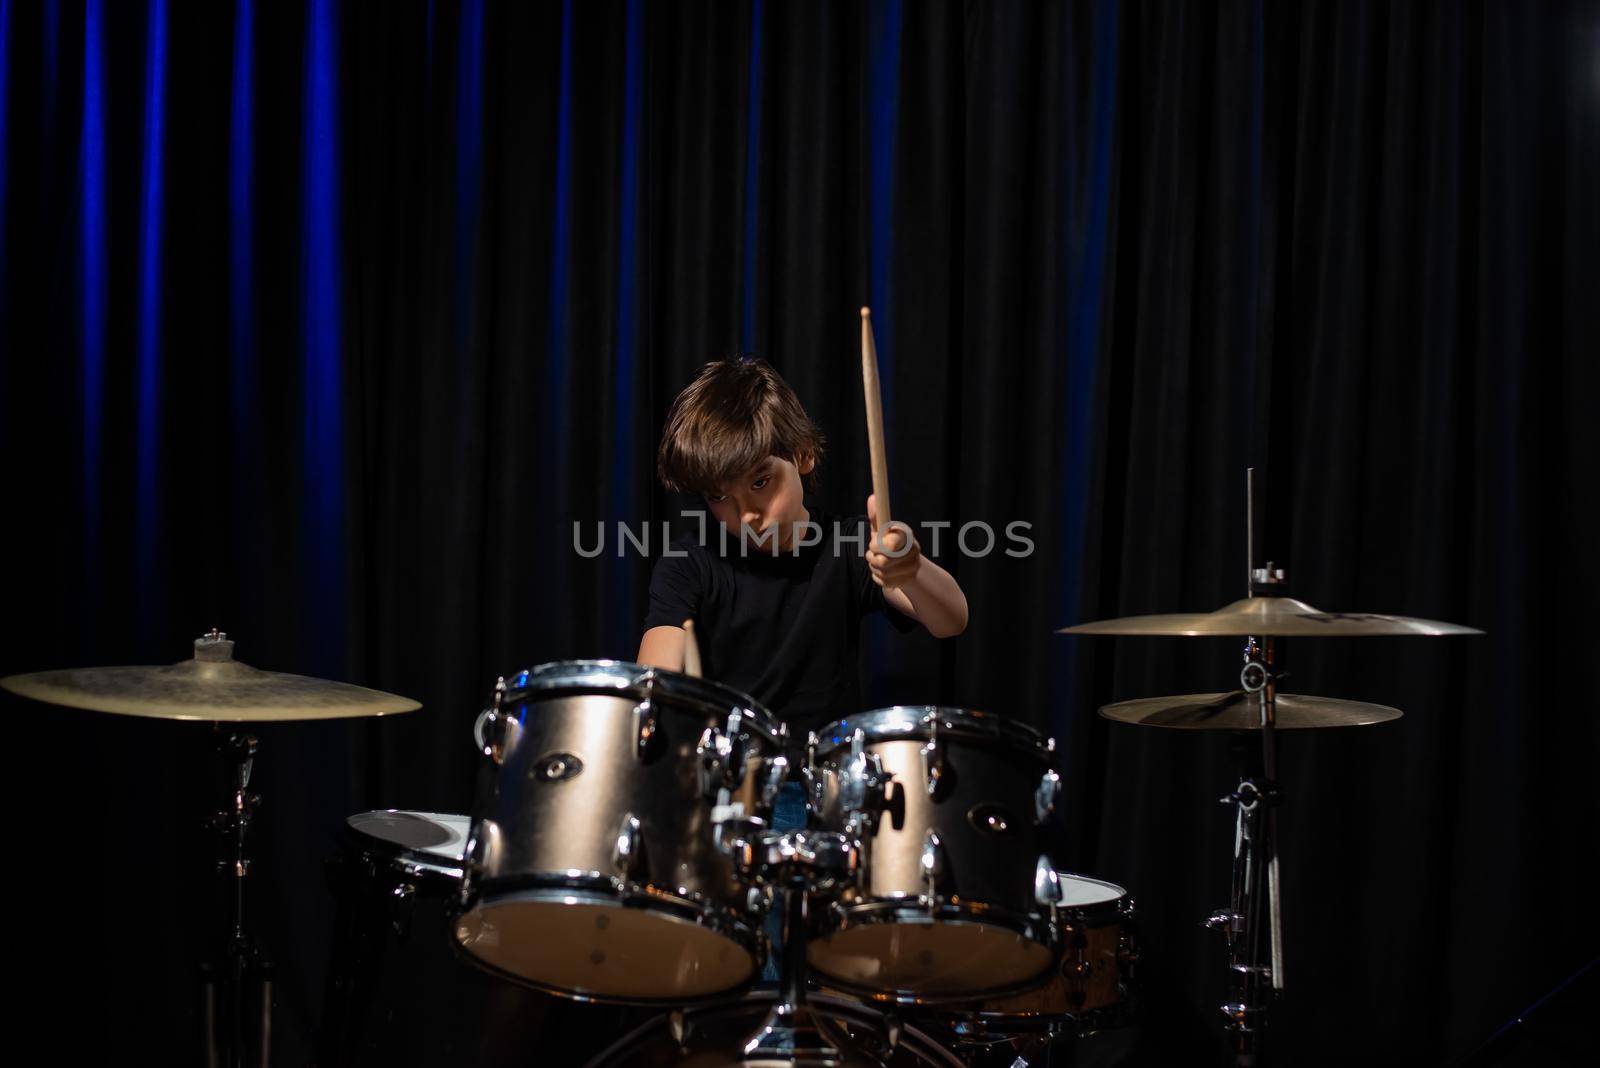 The boy learns to play the drums in the studio on a black background. Music school student.